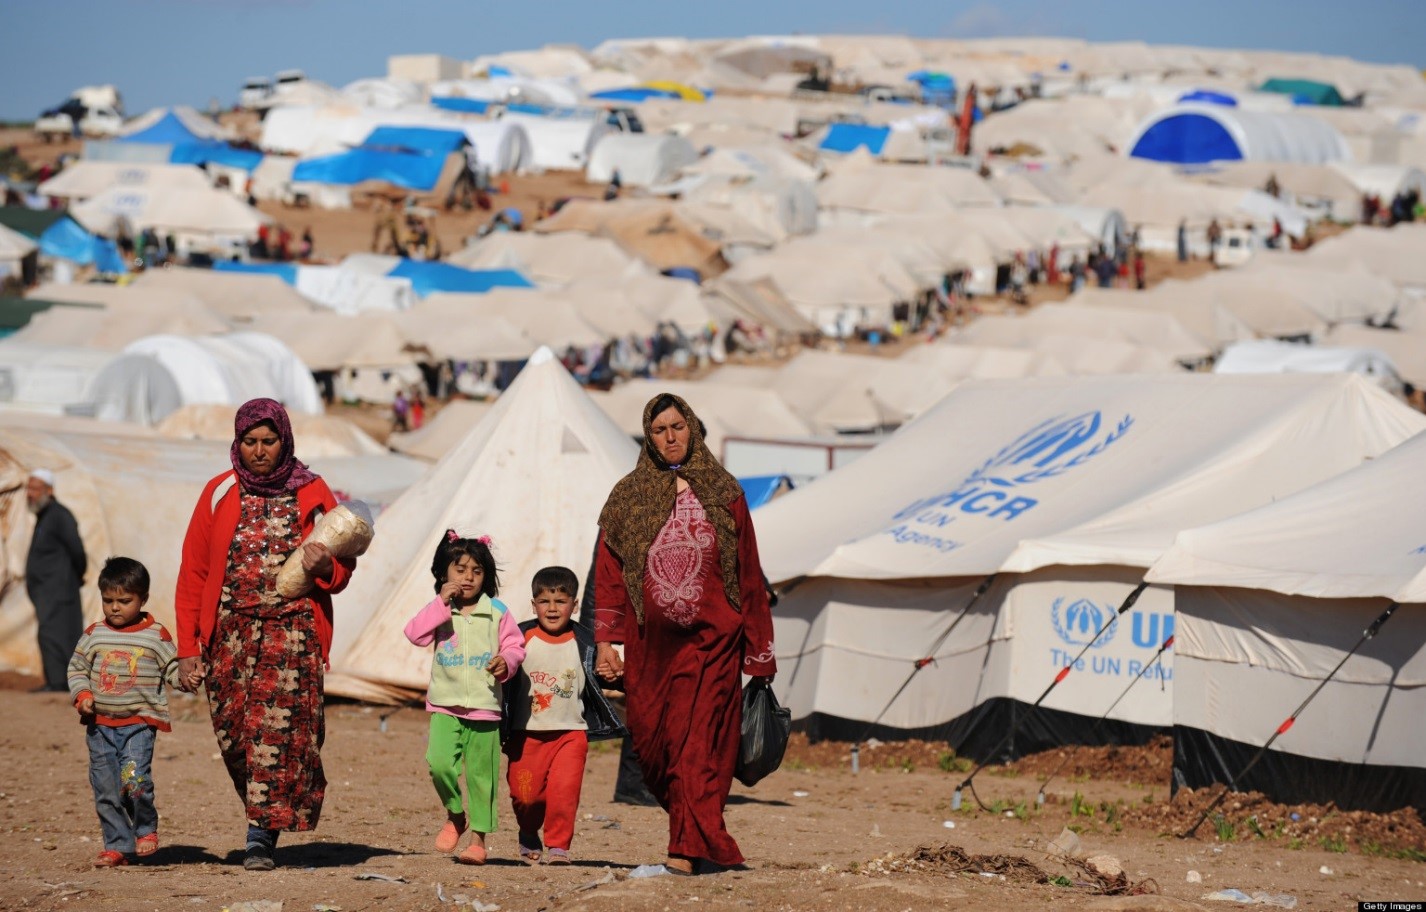 Syrian Refugees: A Crisis with Undue International Response